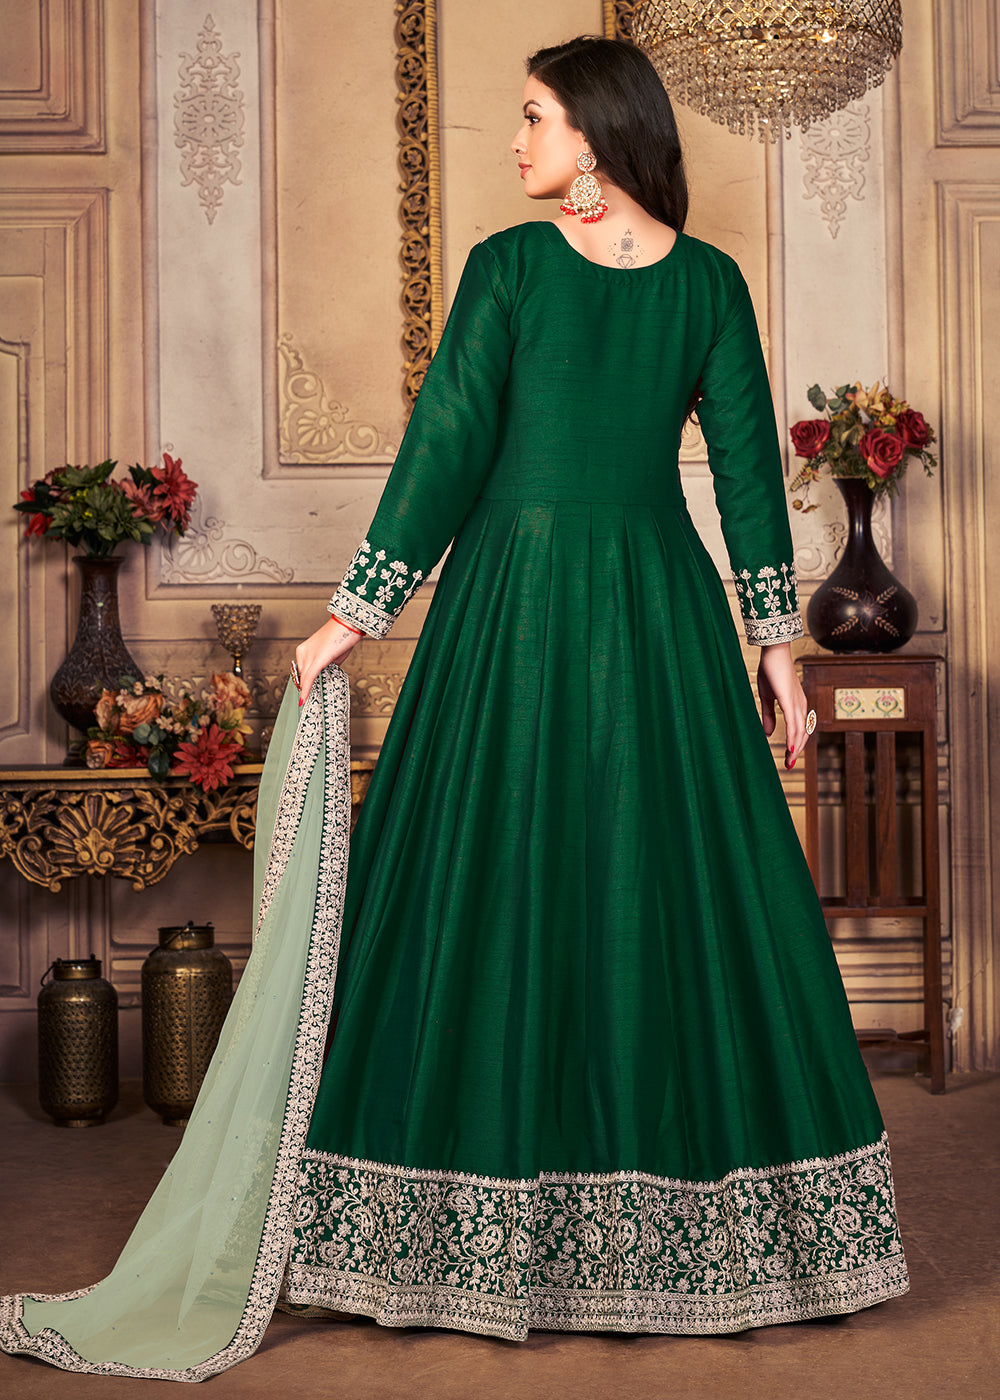 Buy Now Festive Elegant Green Embroidered Silk Anarkali Suit Online in Canada at Empress Clothing.